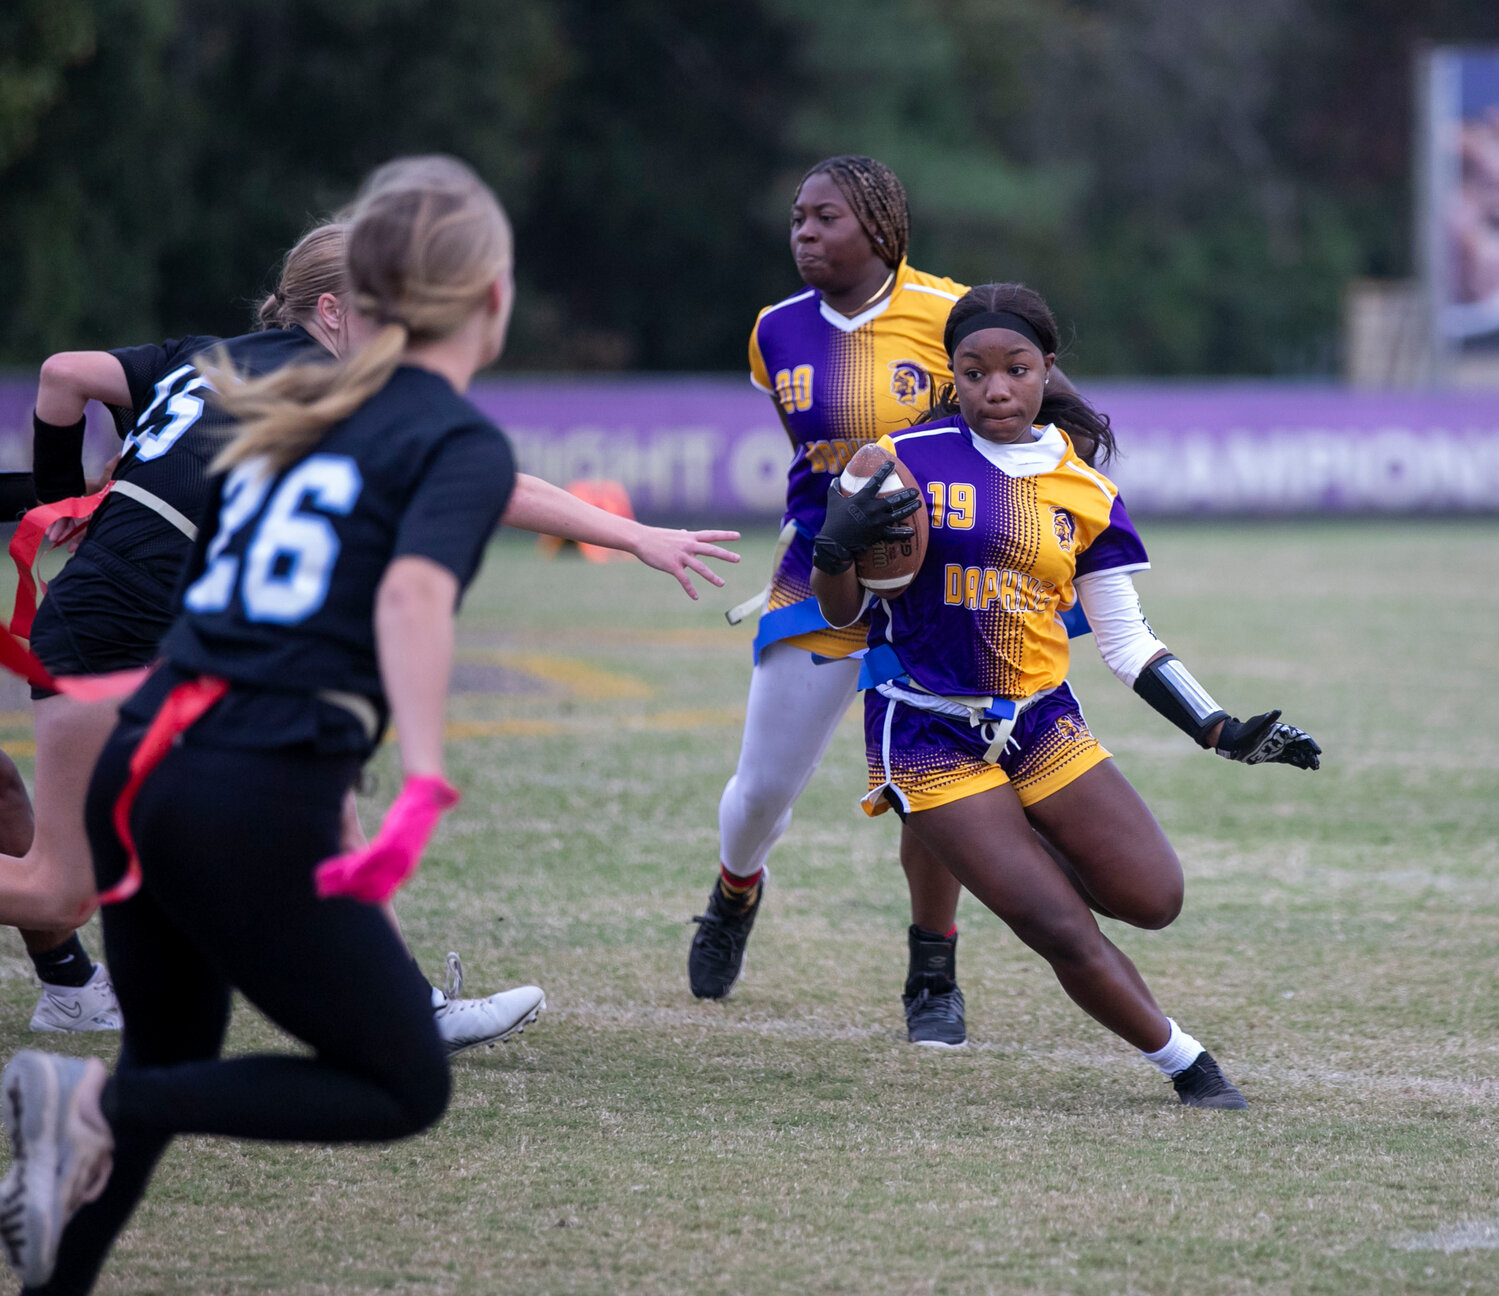 Sophomore Haile Moorer picks up extra yards on a first-half carry as part of Daphne’s 20-0 win over the MGM Vikings to open the Class 6A-7A Area 1-2 Tournament at Jubilee Stadium on Monday, Oct. 30. That win, paired with a 13-7 decision in the nightcap, punched the Trojans’ ticket to the state tournament in their inaugural season.